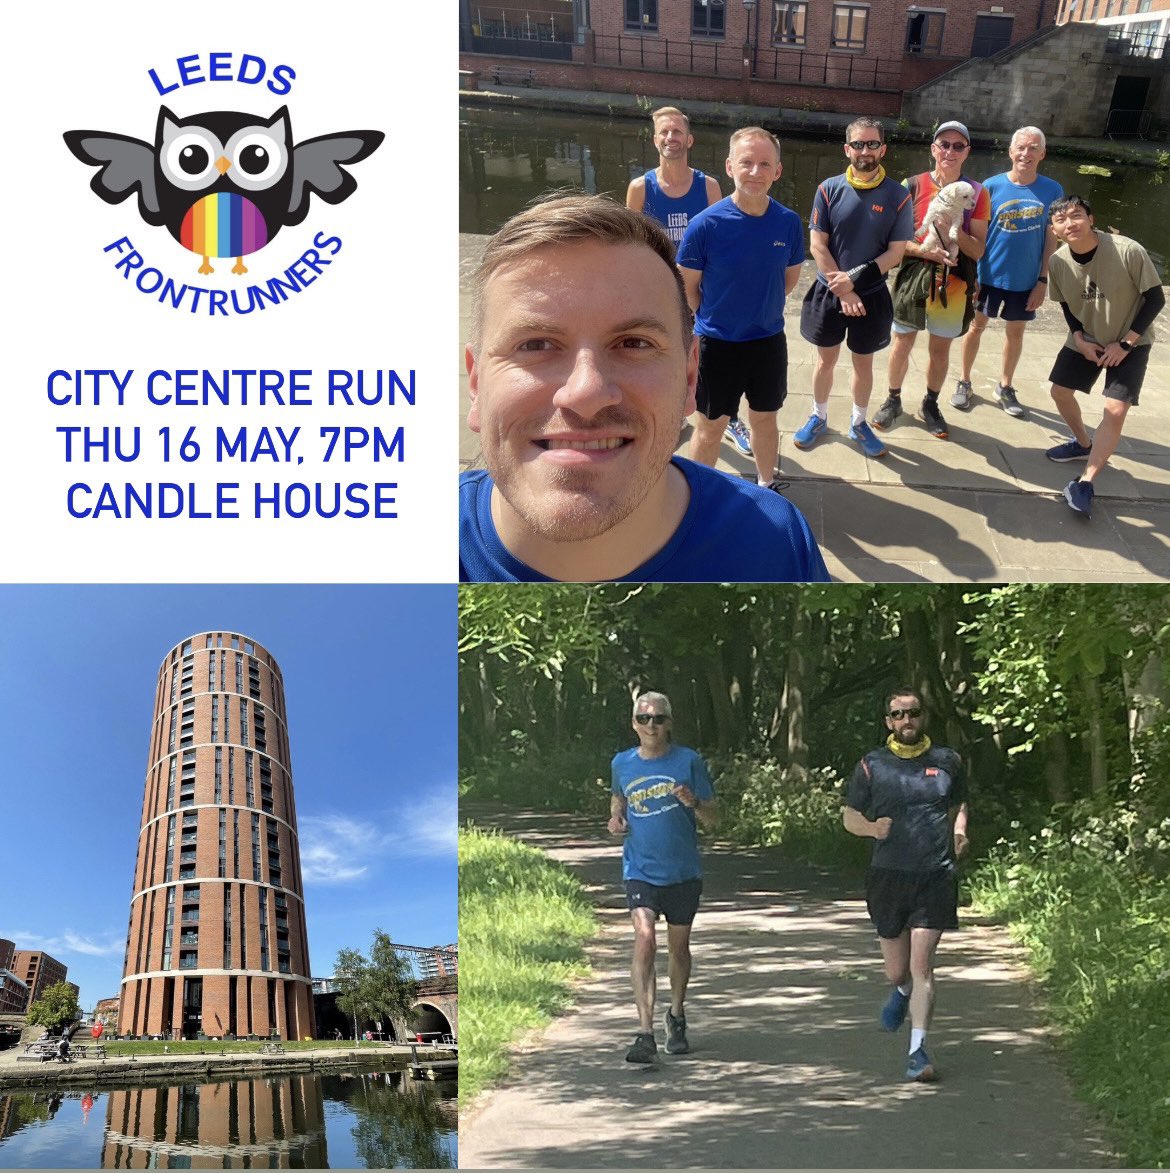 New run this Thursday 16th May at 7pm, meeting at Candle House near Leeds Station. Running west along the canal. Message us if you want to join! #leedsfrontrunners #frontrunners #internationalfrontrunners #running #lgbtq #lgbtrunning #leedslgbt #leeds